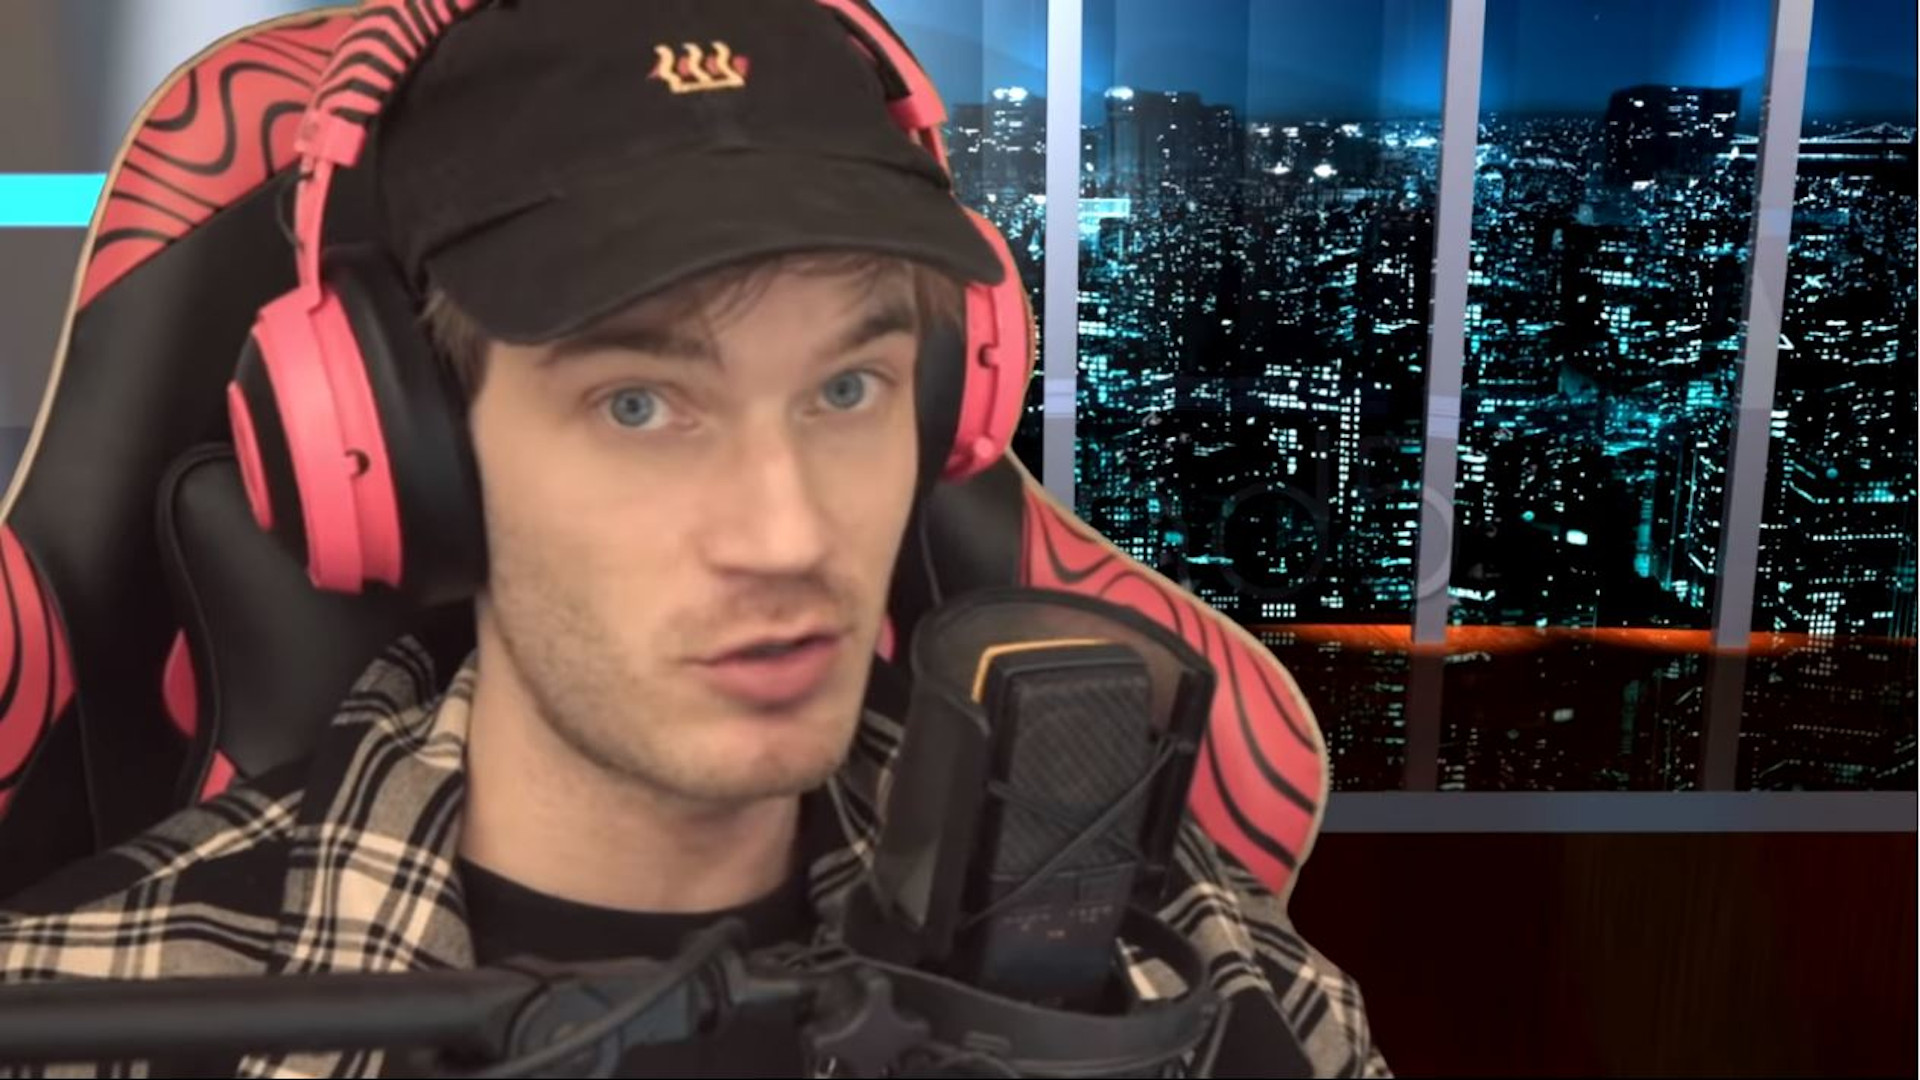 PewDiePie is going to take a break from YouTube next year | The Loadout